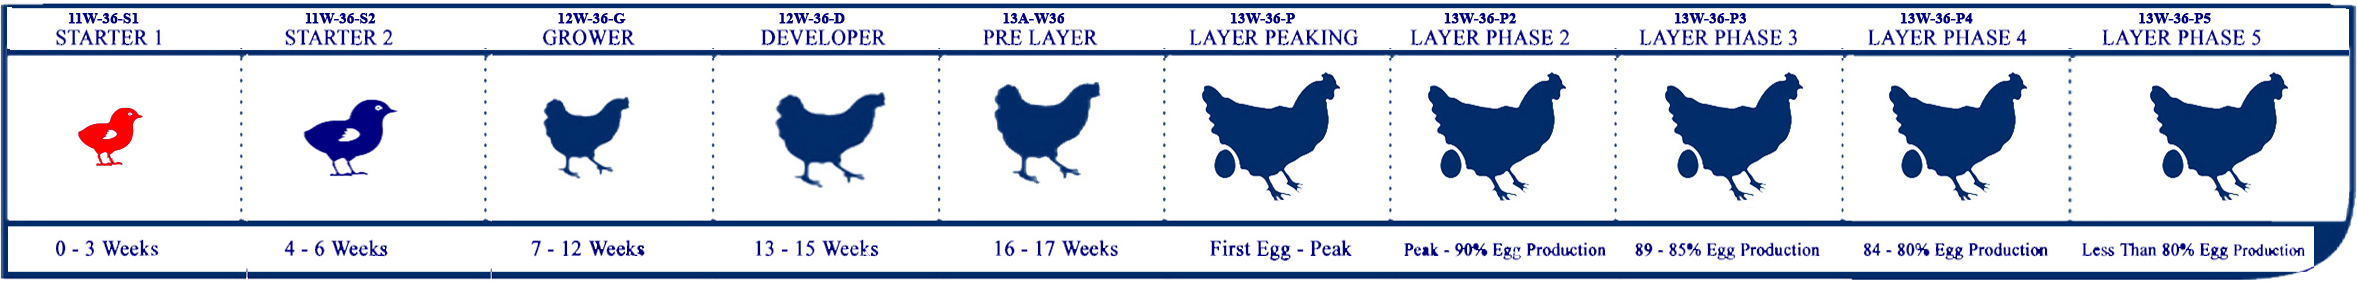 Starter Lifecycle